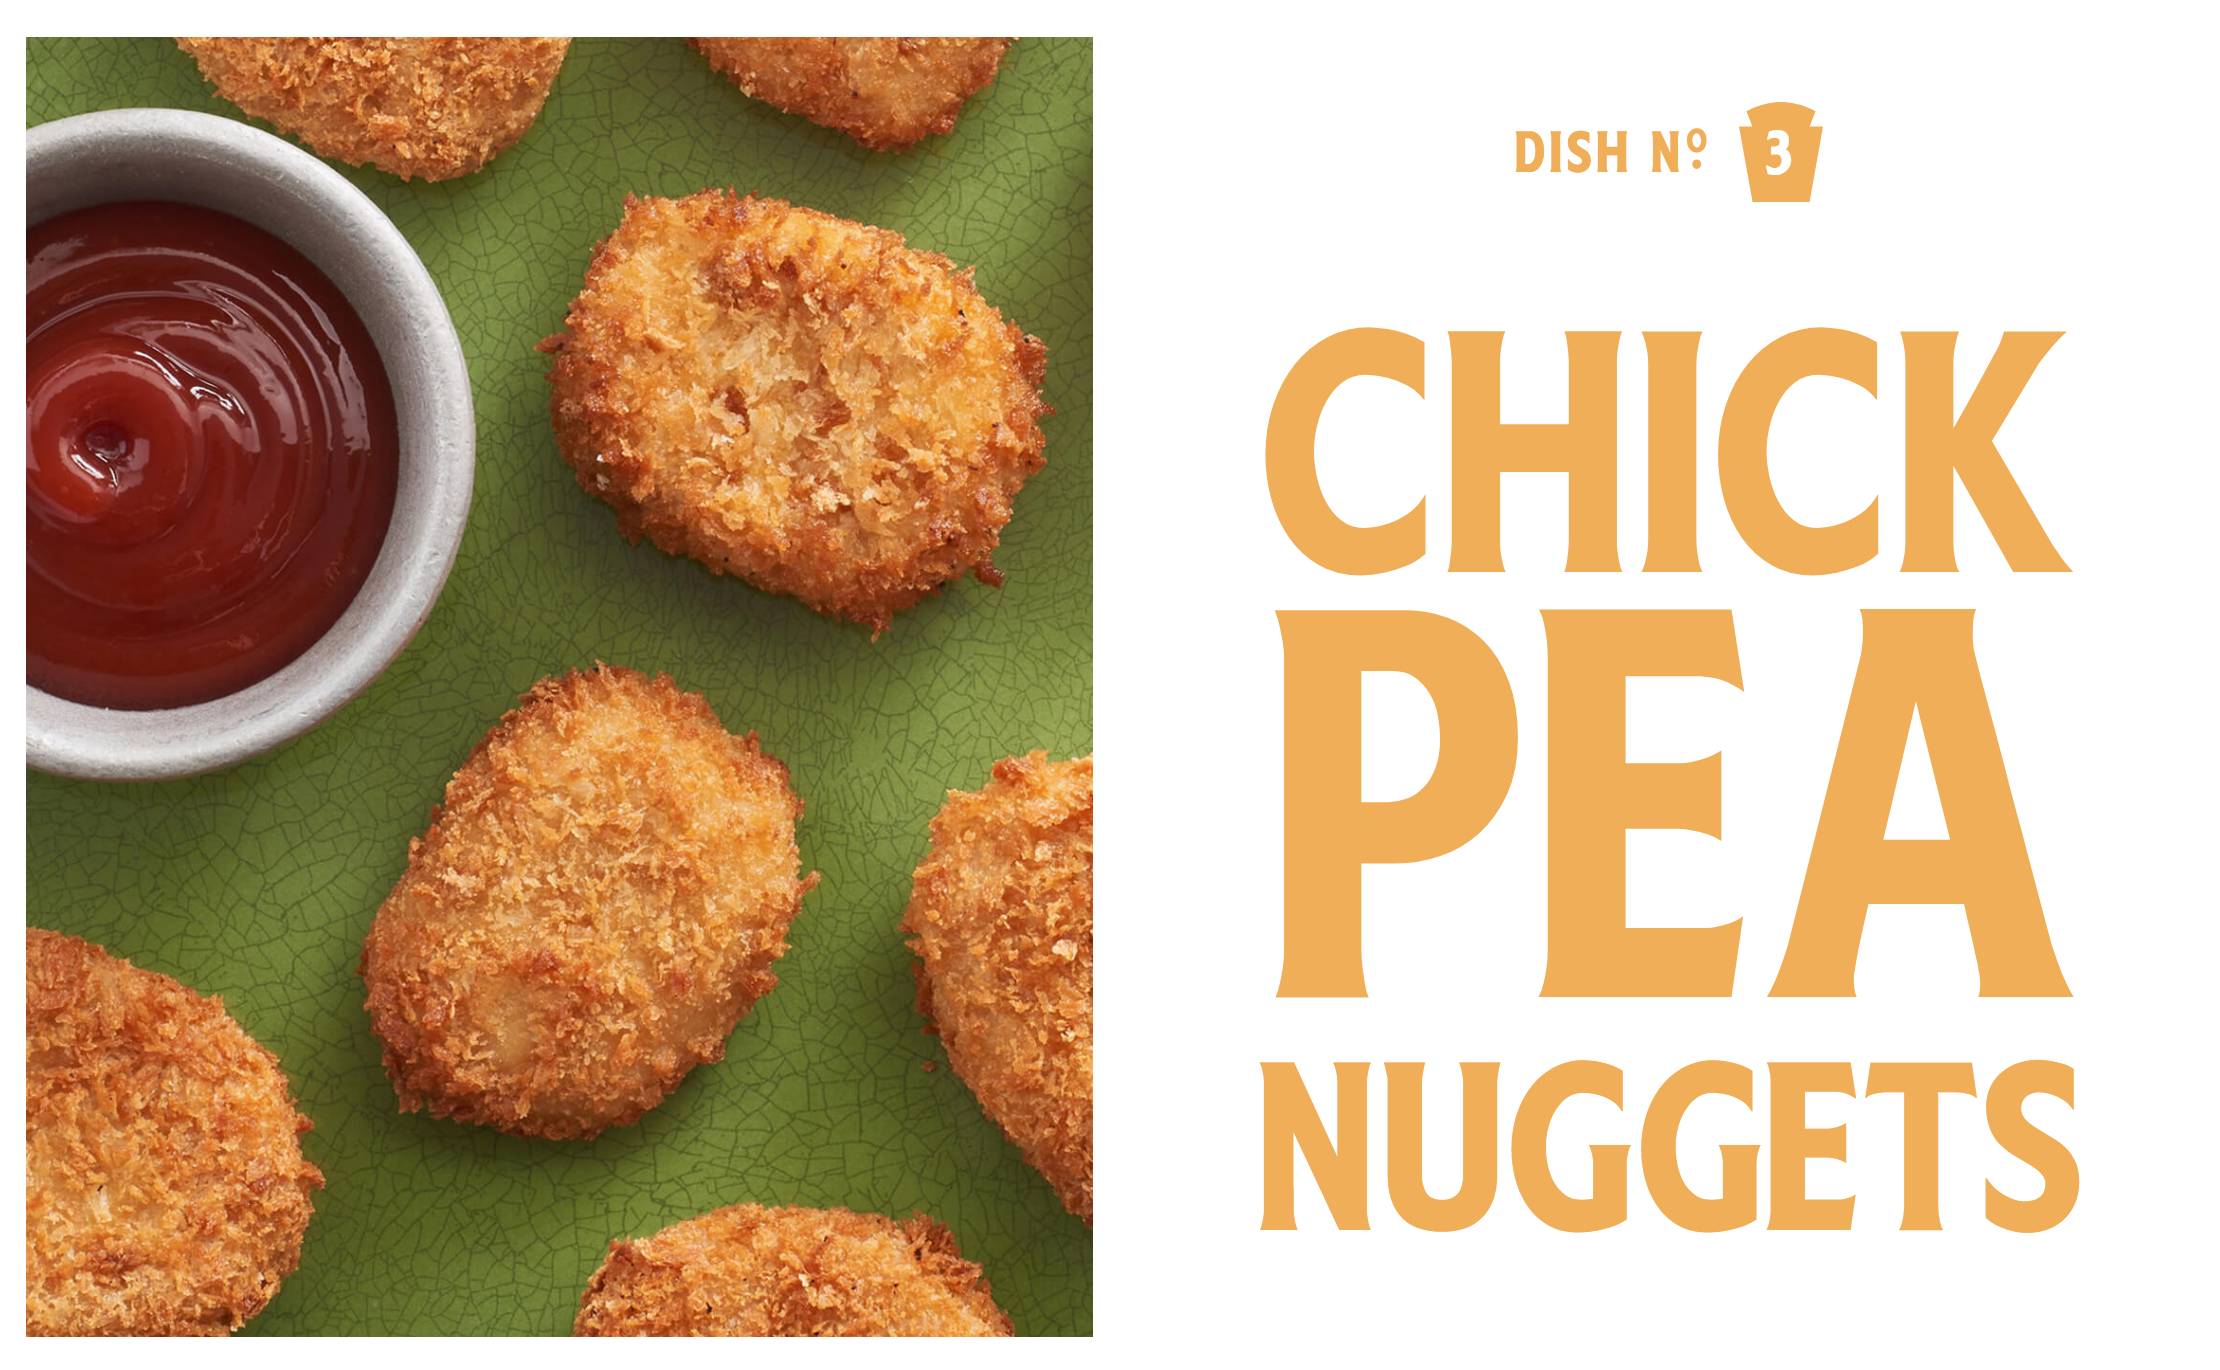 Heinz ad with chick pea nuggets is food photography by Alison Gootee Photography